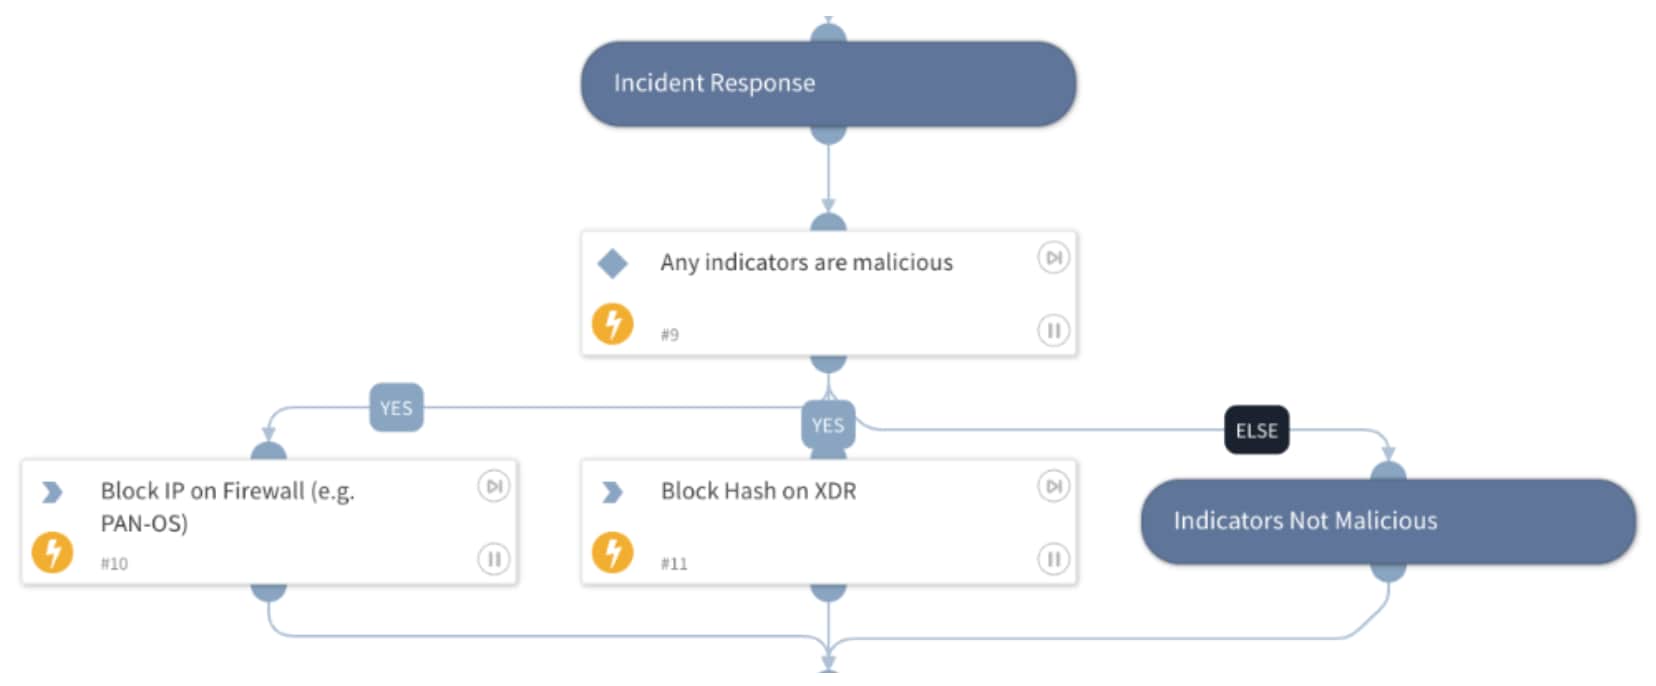 Incident response actions based on incident severity